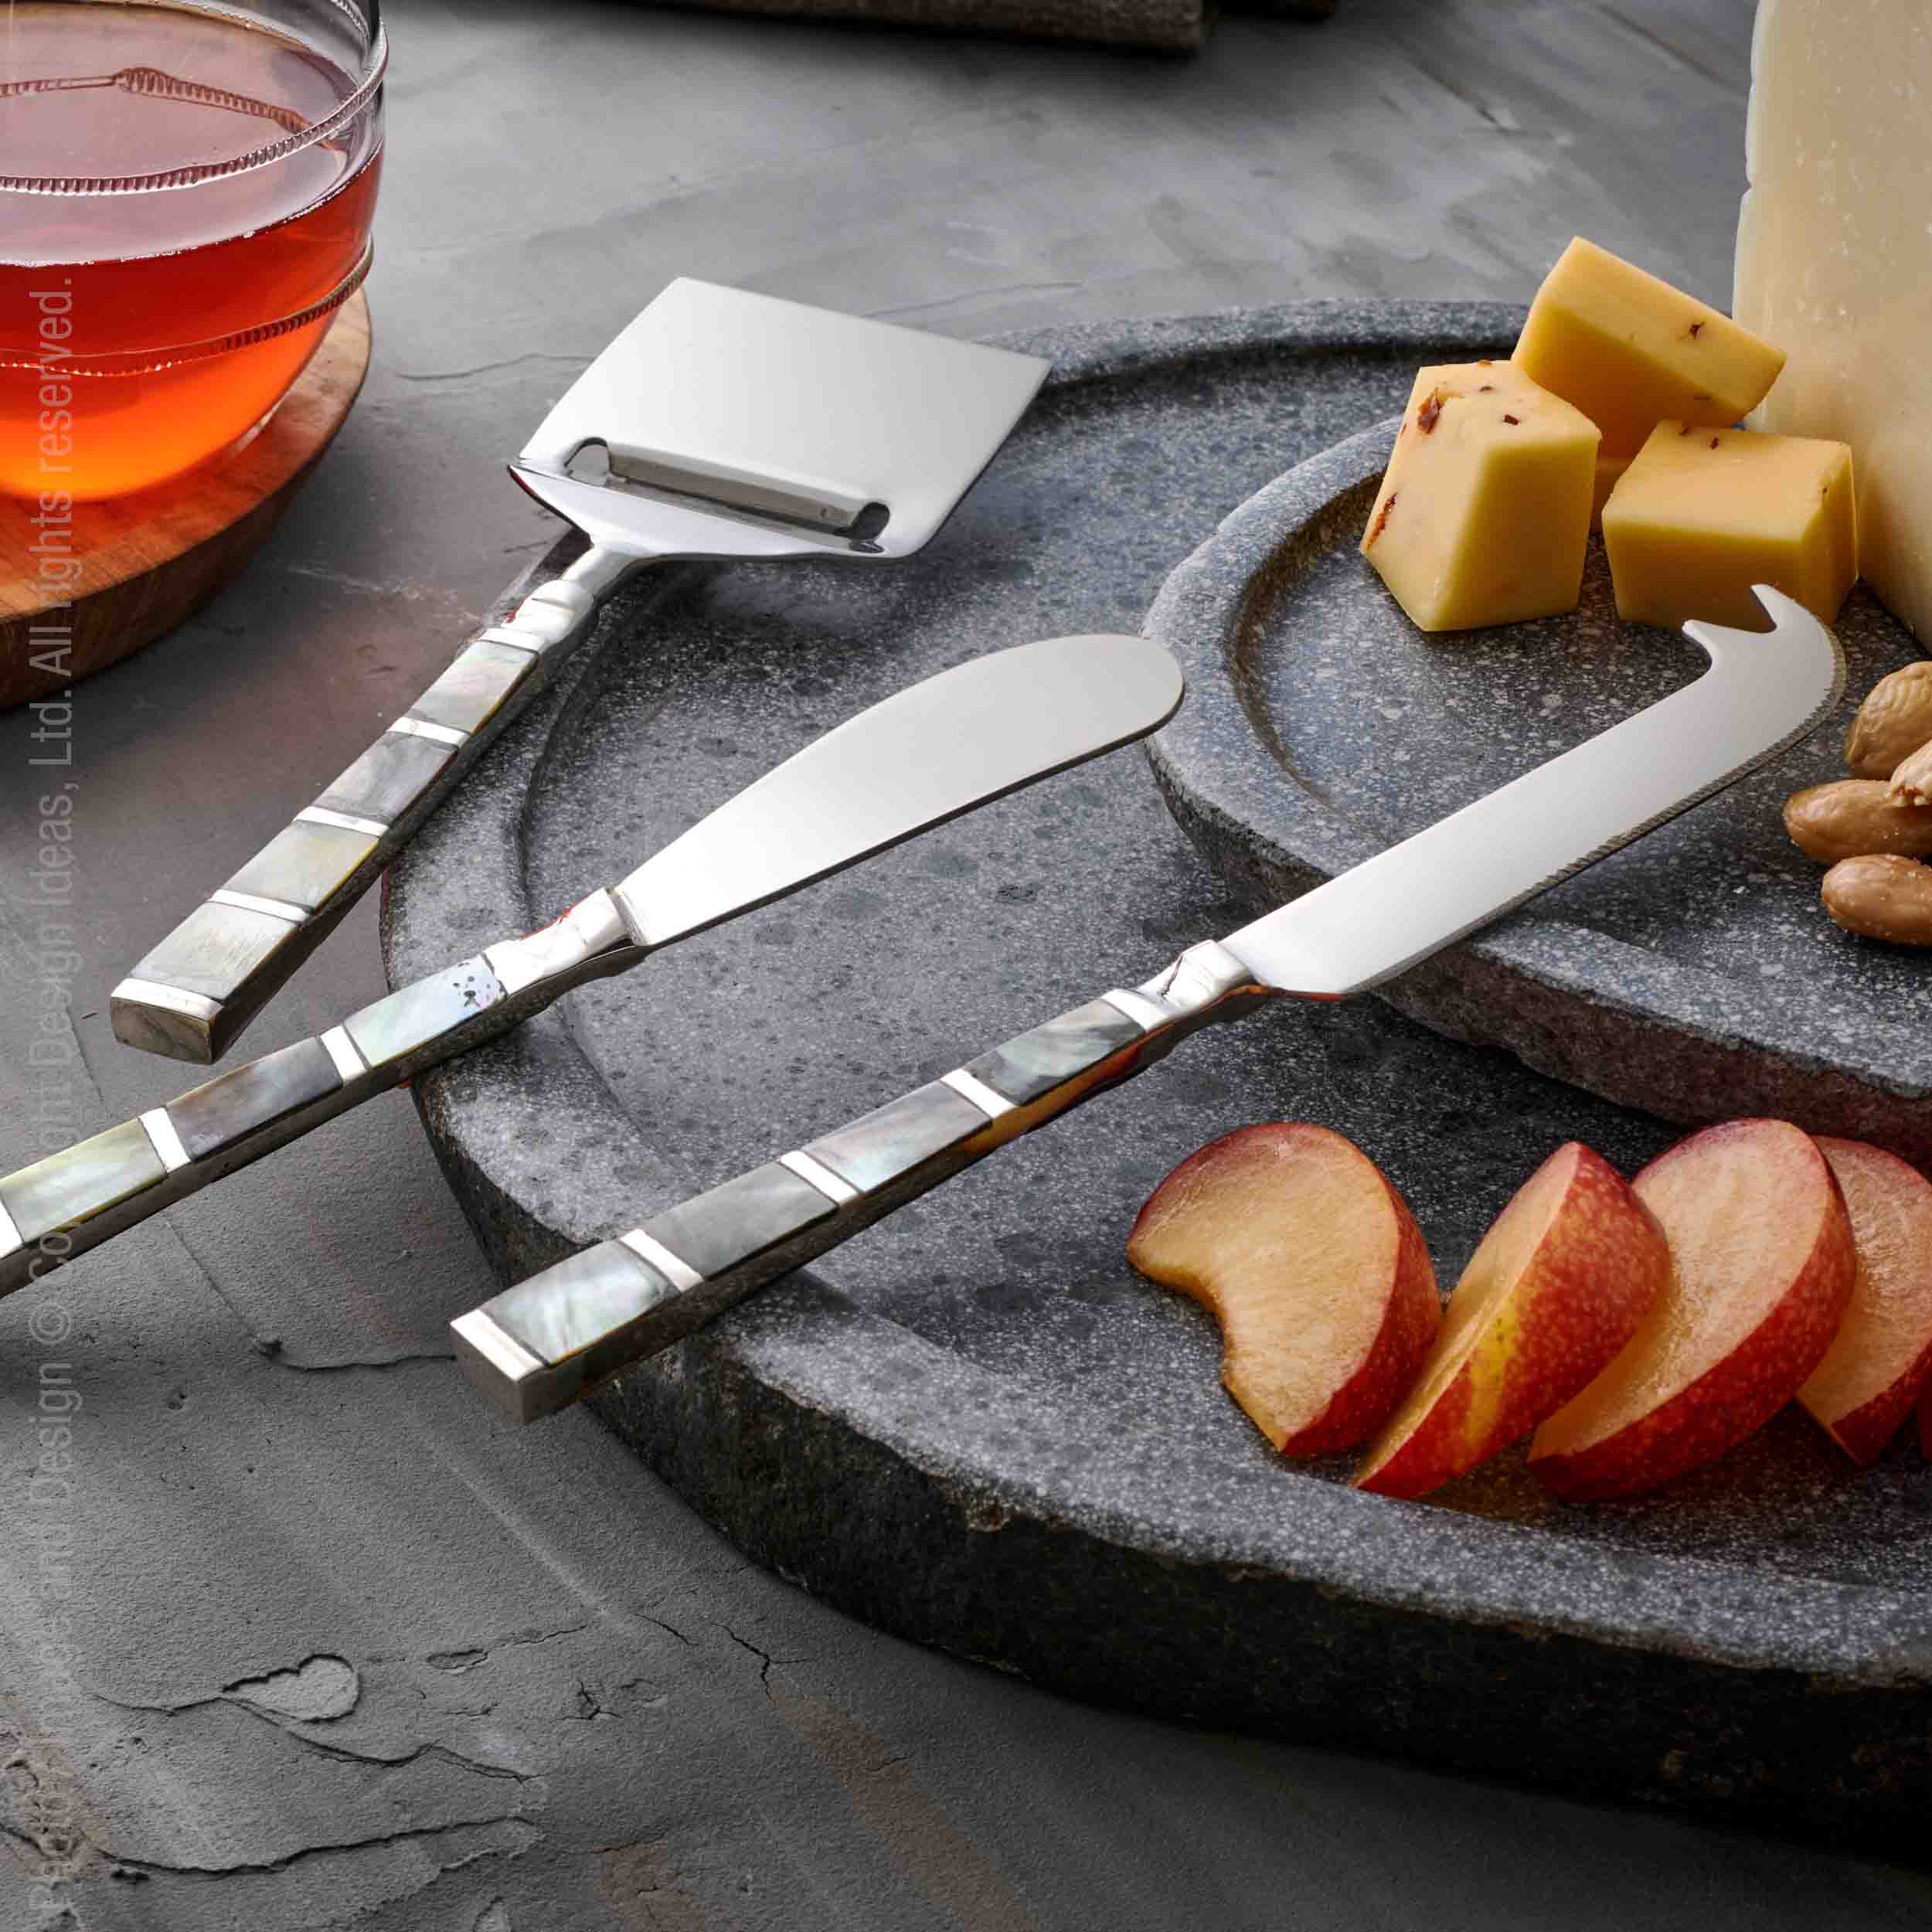 Abalon™ cheese knives - Silver | Image 2 | Premium Utensils from the Abalon collection | made with Stainless Steel for long lasting use | texxture